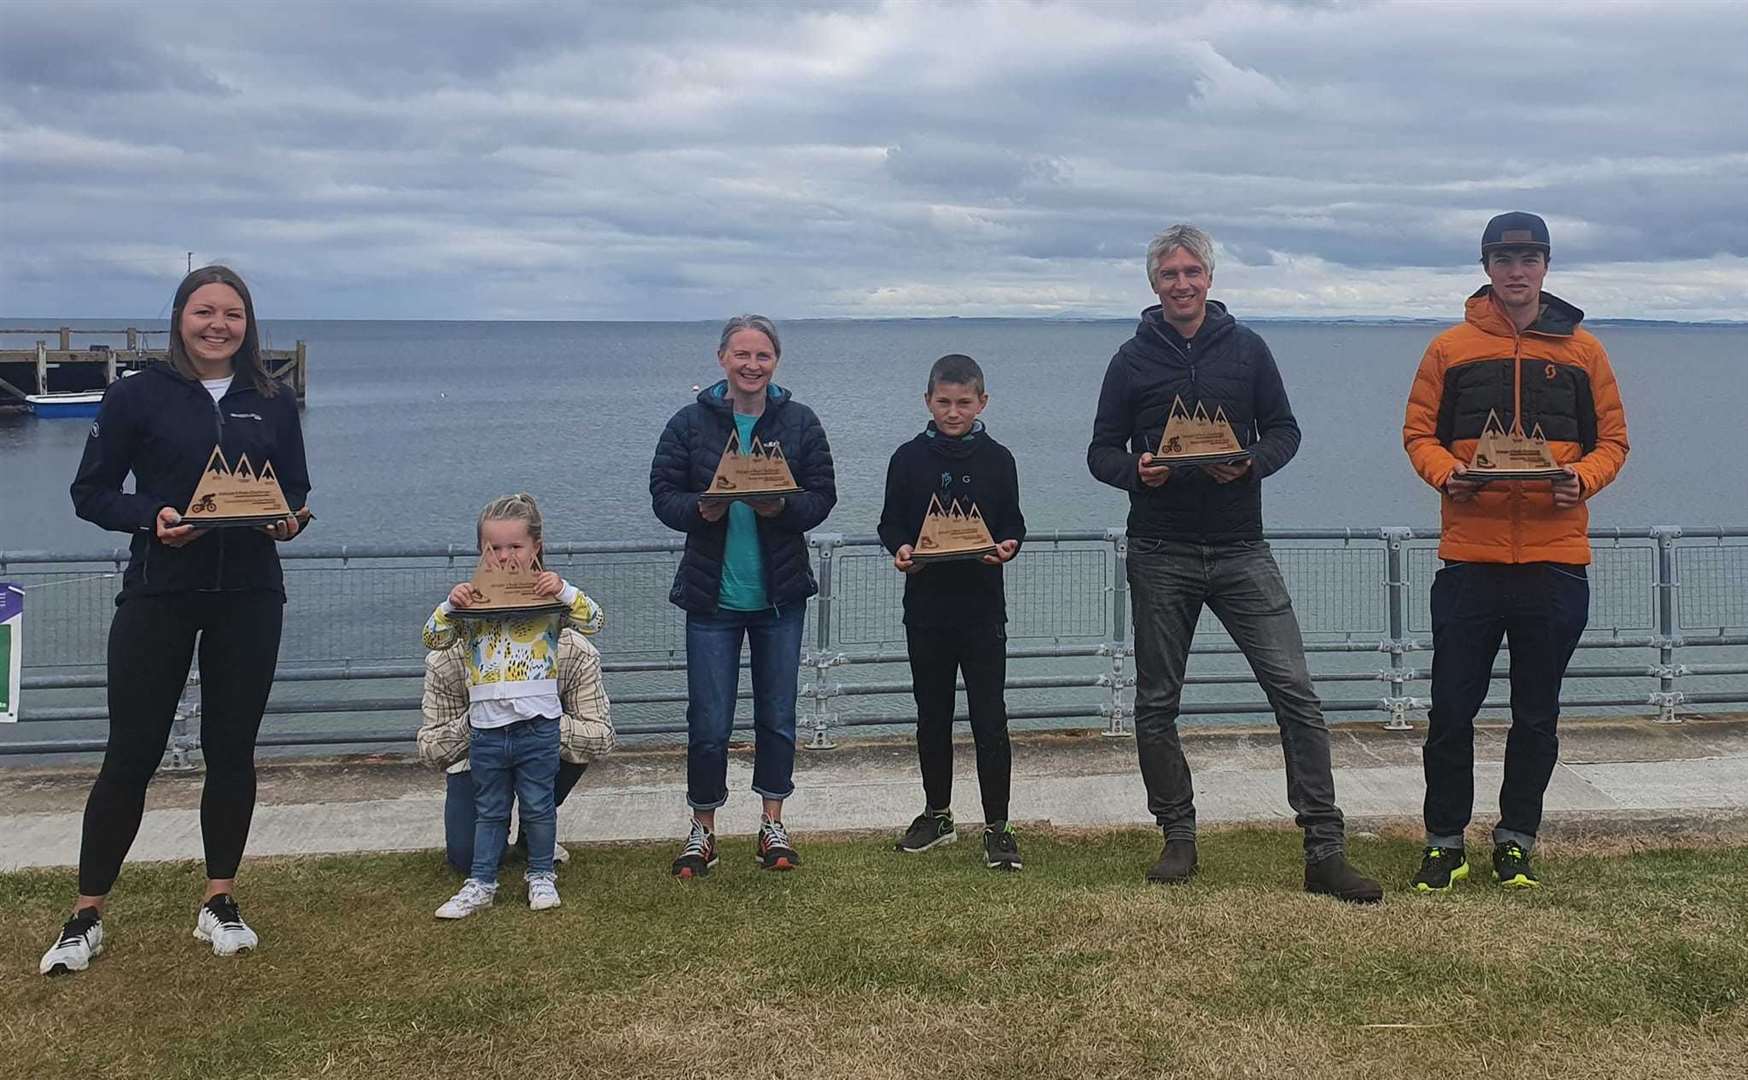 Winners of the inaugural Golspie 3 Peaks Challenge in 2021 show off the handmade trophies they were awarded.